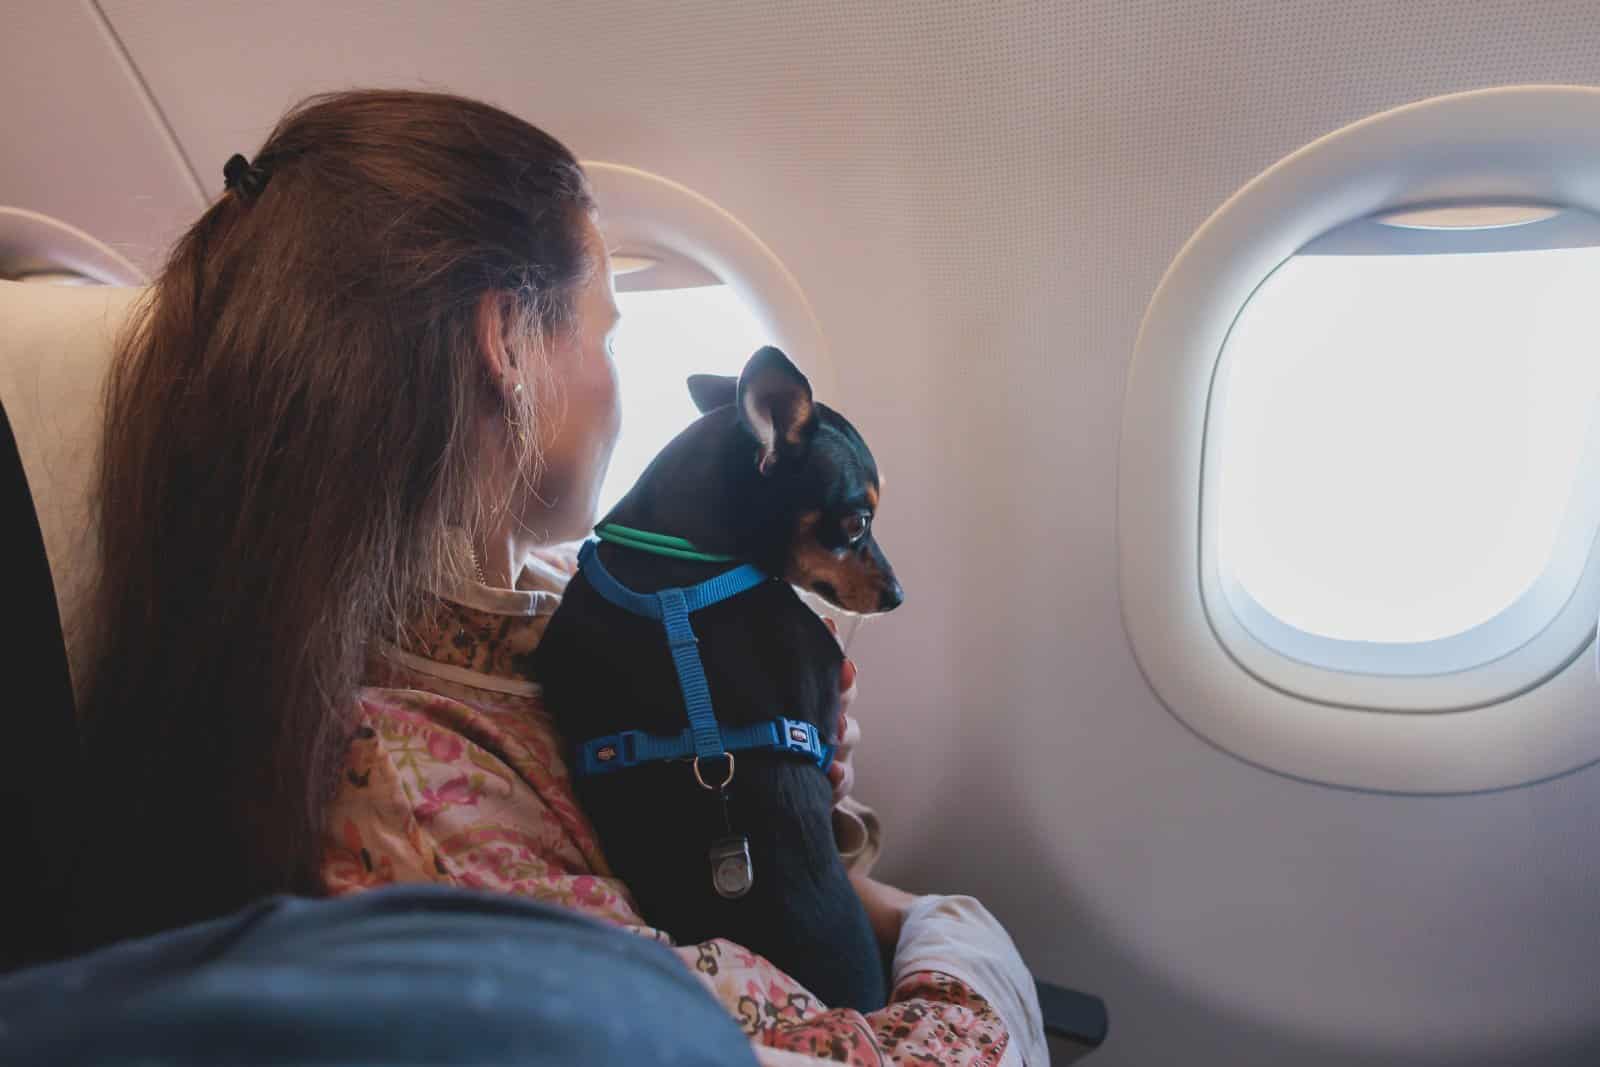 <p class="wp-caption-text">Image Credit: Shutterstock / Tsuguliev</p>  <p><span>Get them used to their carrier or harness well before the trip. Treats help. Treats always help.</span></p>